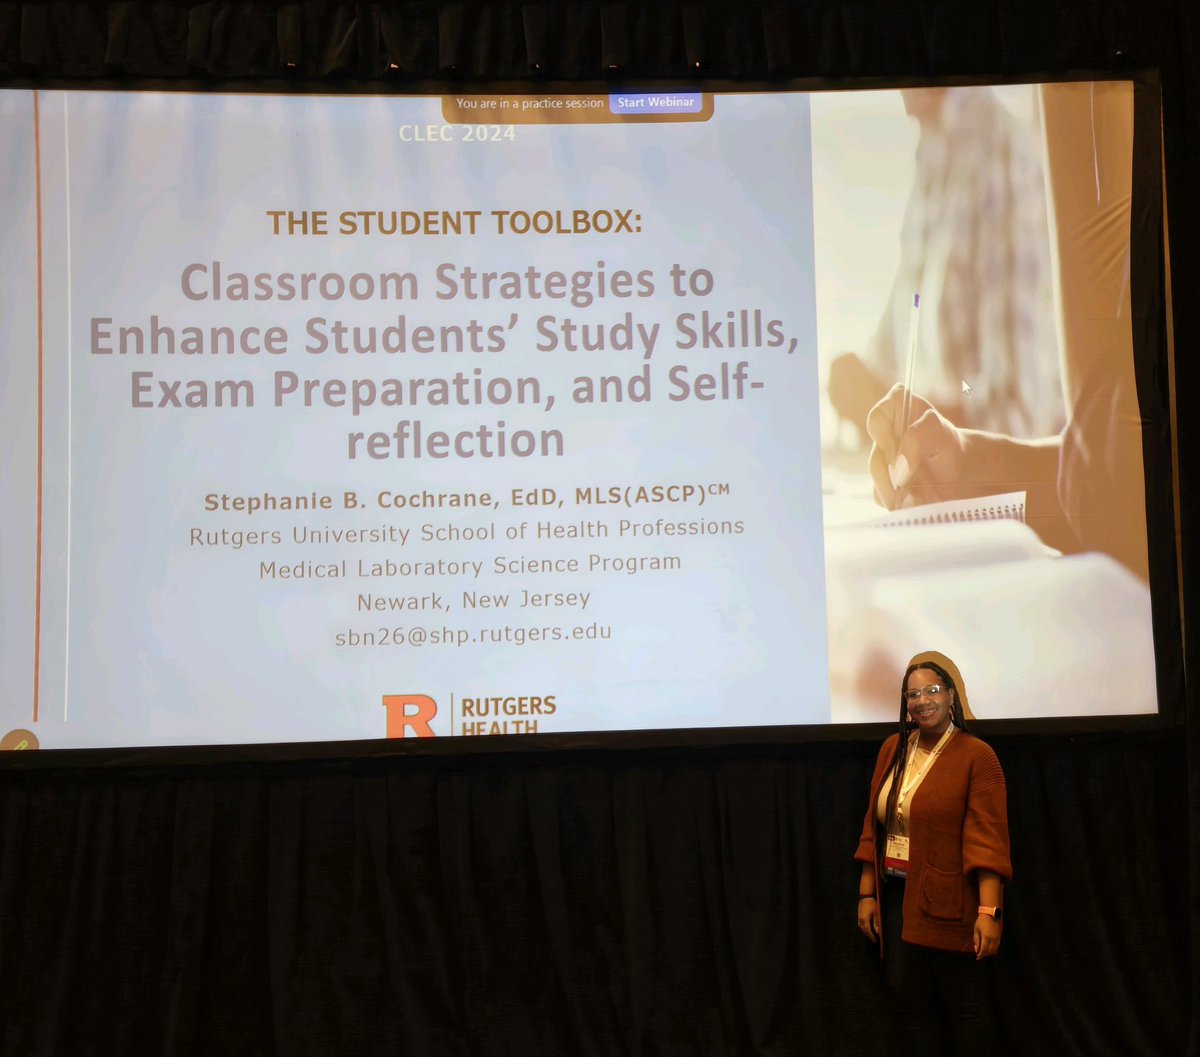 Yesterday at #CLEC2024, I shared classroom strategies that can be used to enhance study skills, exam prep, & self-reflection! Creating desirable difficulties is the key to long-term knowledge retention and transfer of knowledge 🧠 #ASCLS